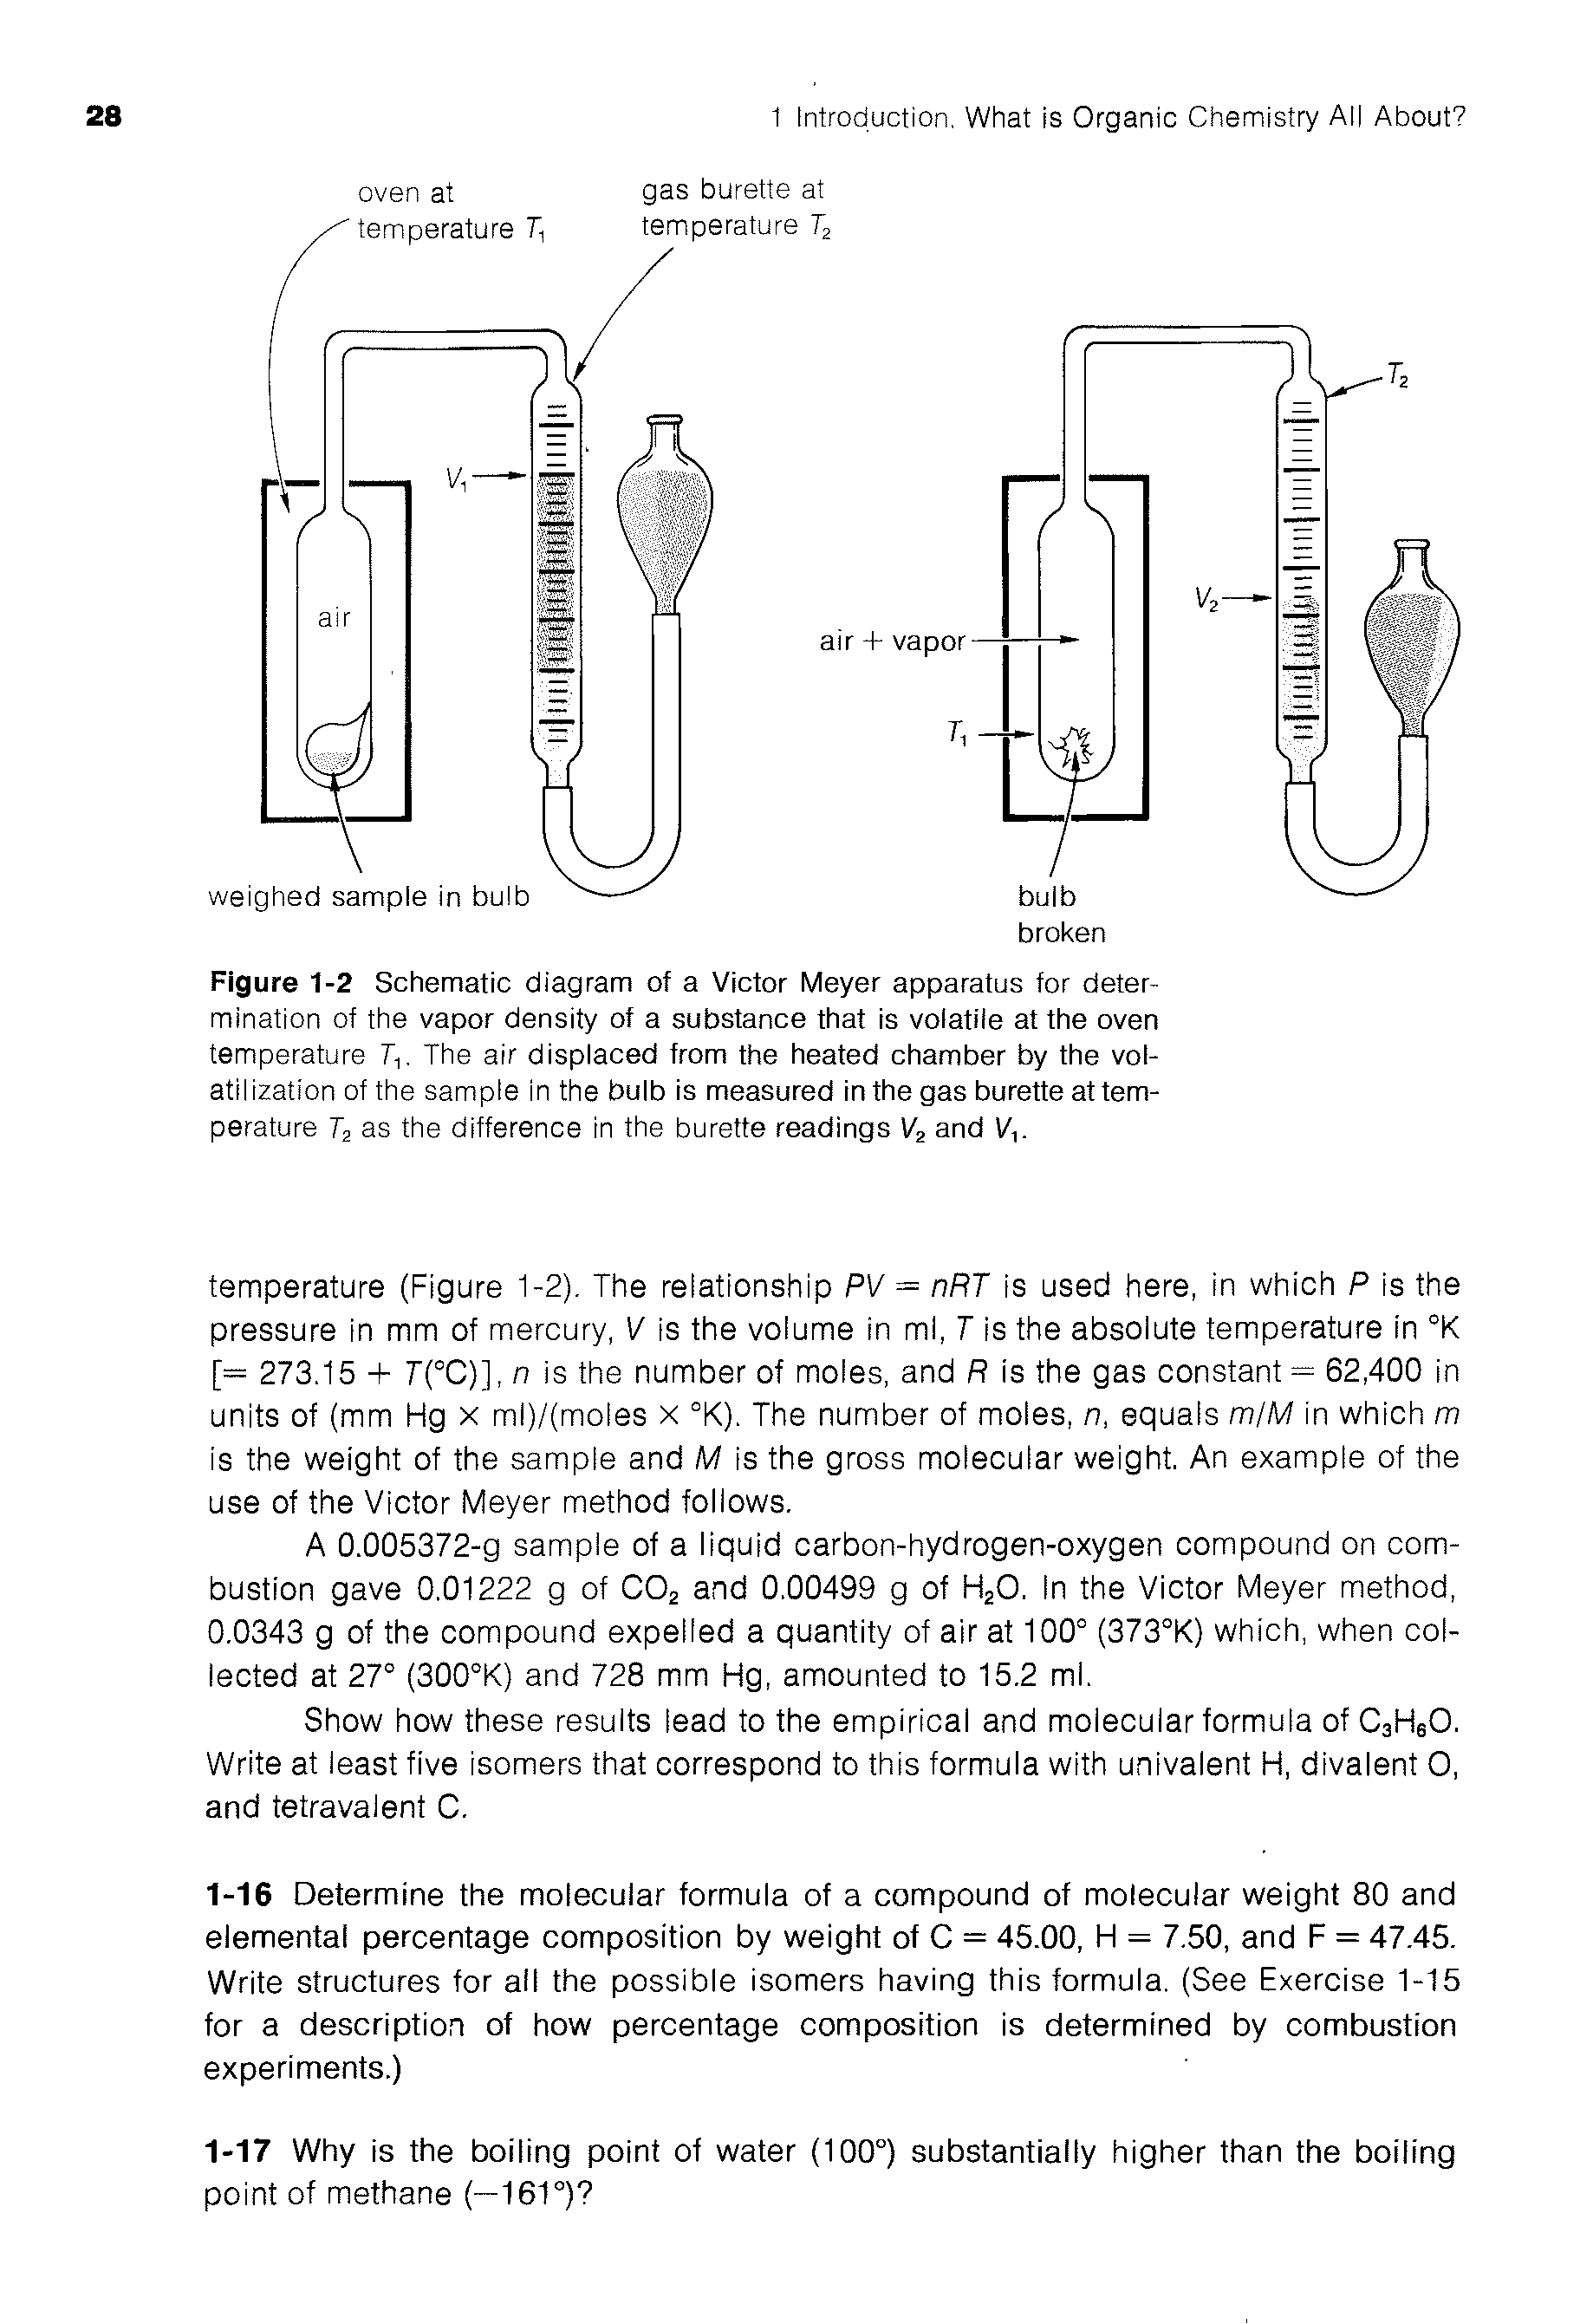 Figure 1-2 Schematic diagram of a Victor Meyer apparatus for determination of the vapor density of a substance that is volatile at the oven temperature 7V The air displaced from the heated chamber by the volatilization of the sample In the bulb is measured in the gas burette at temperature 72 as the difference in the burette readings V2 and V,.